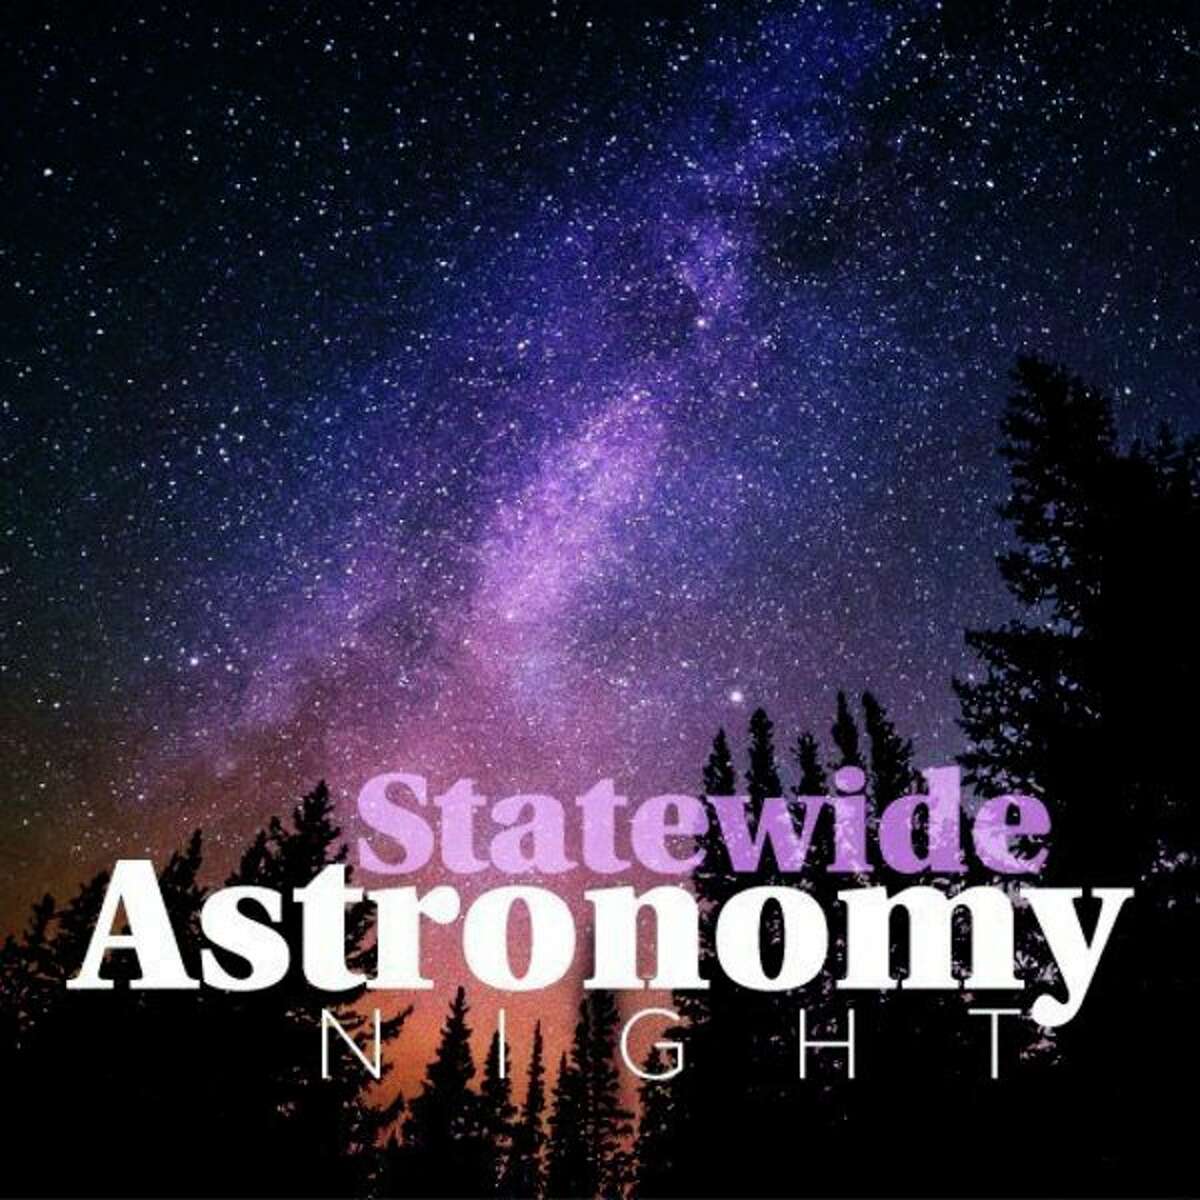 Statewide Astronomy Night